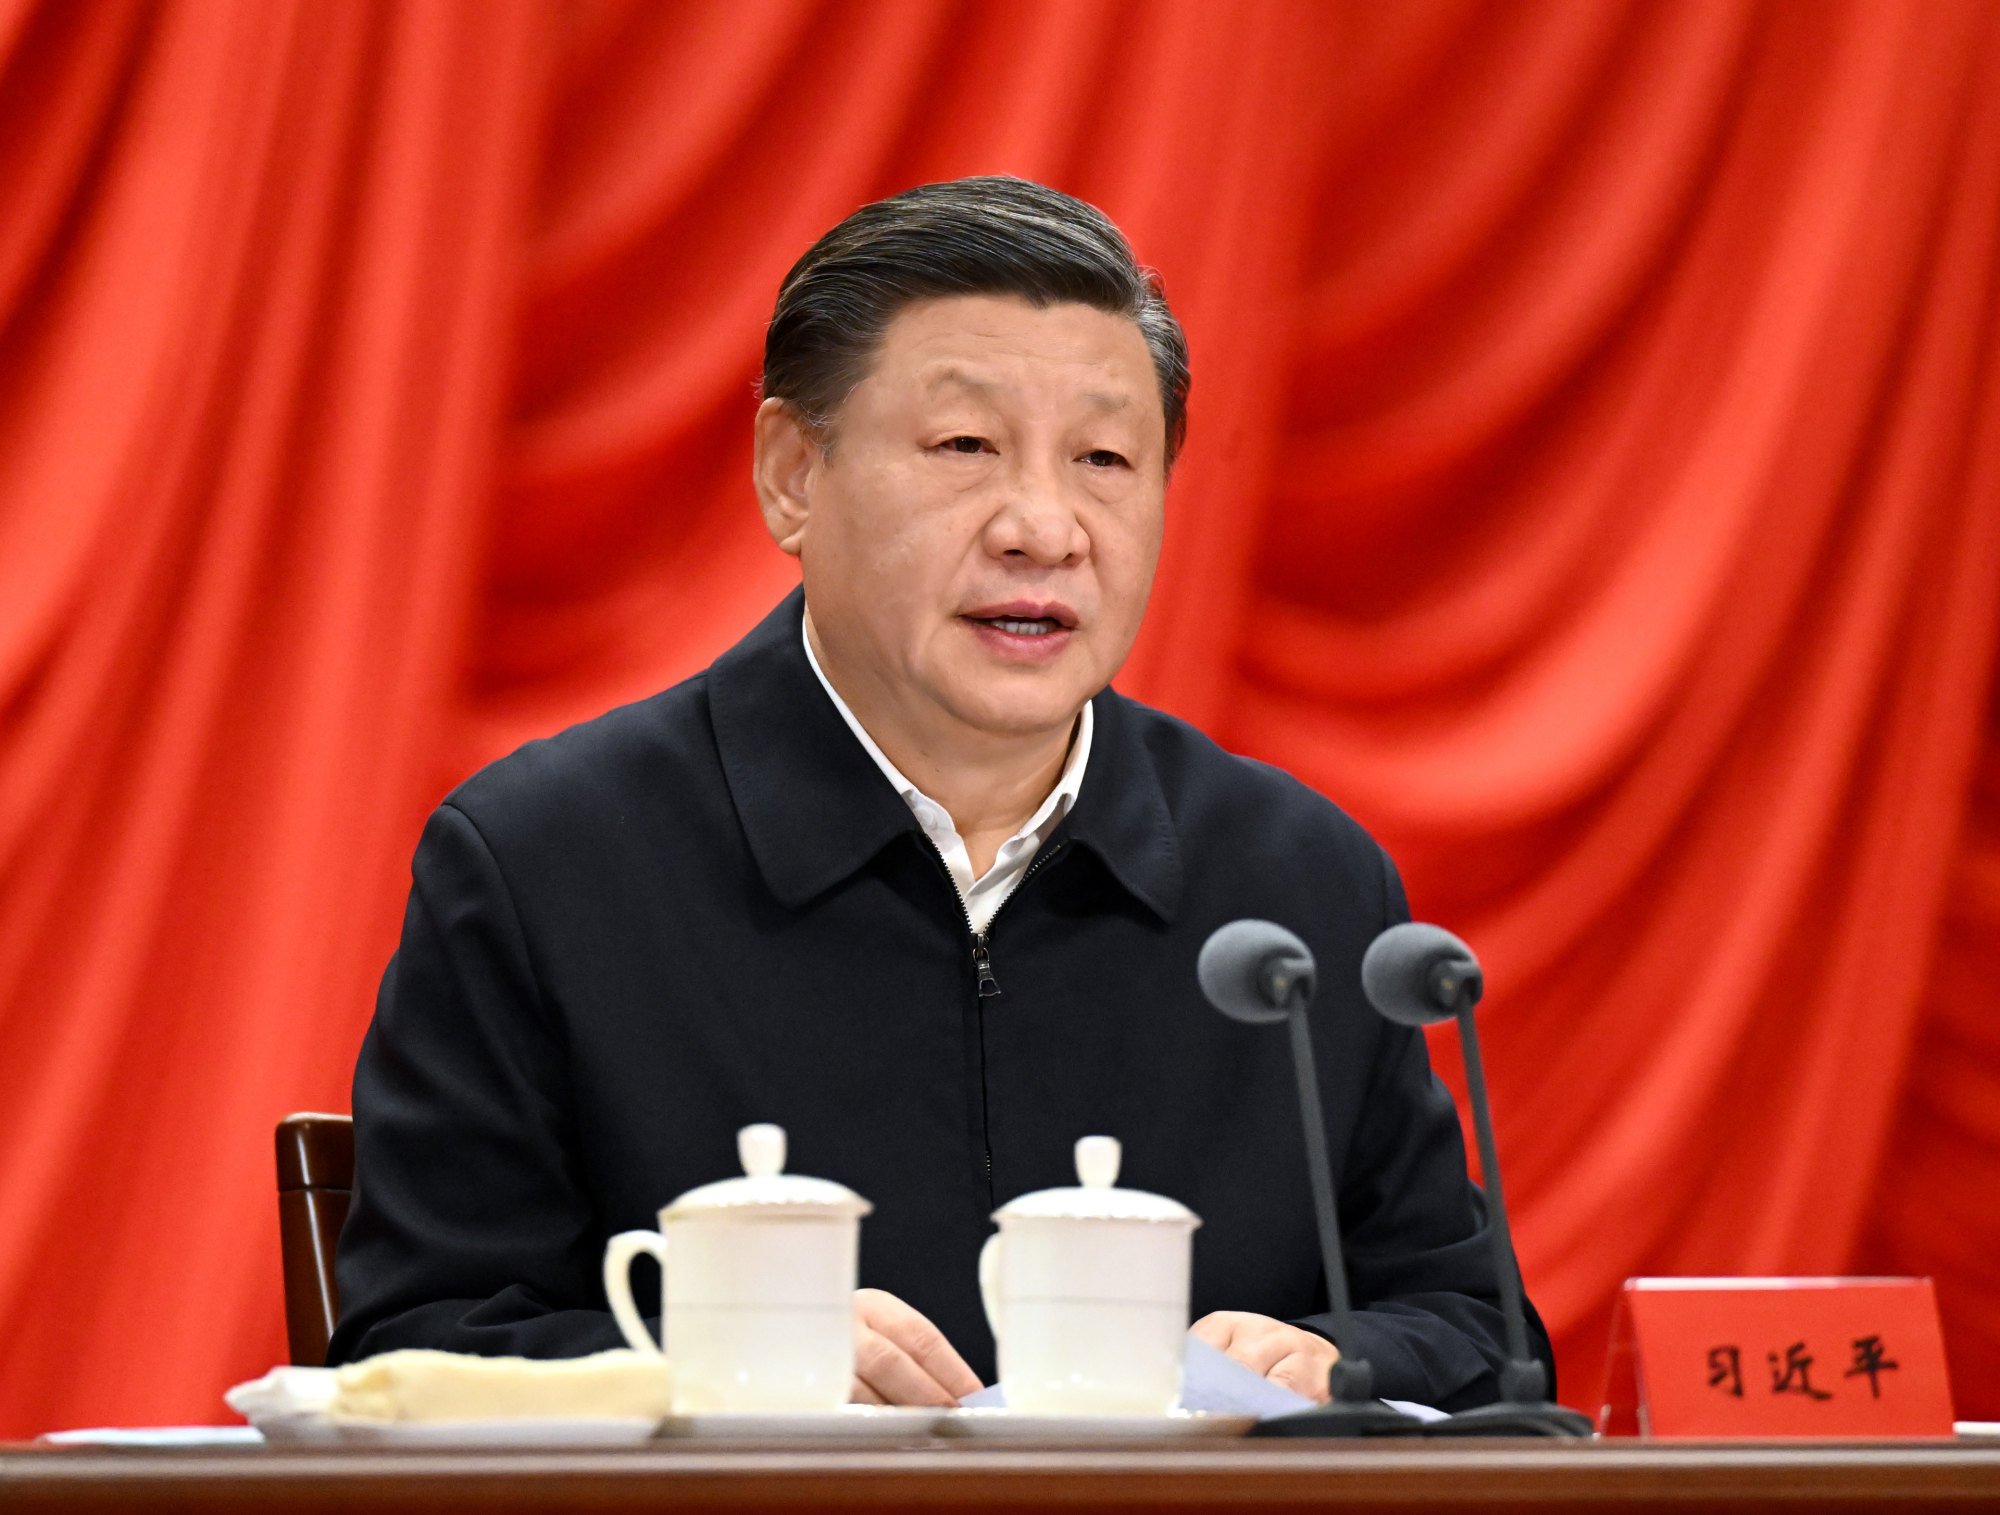 Xi Jinping told top cadres to “be patient and move forward in a steadfast manner”. Photo: Xinhua